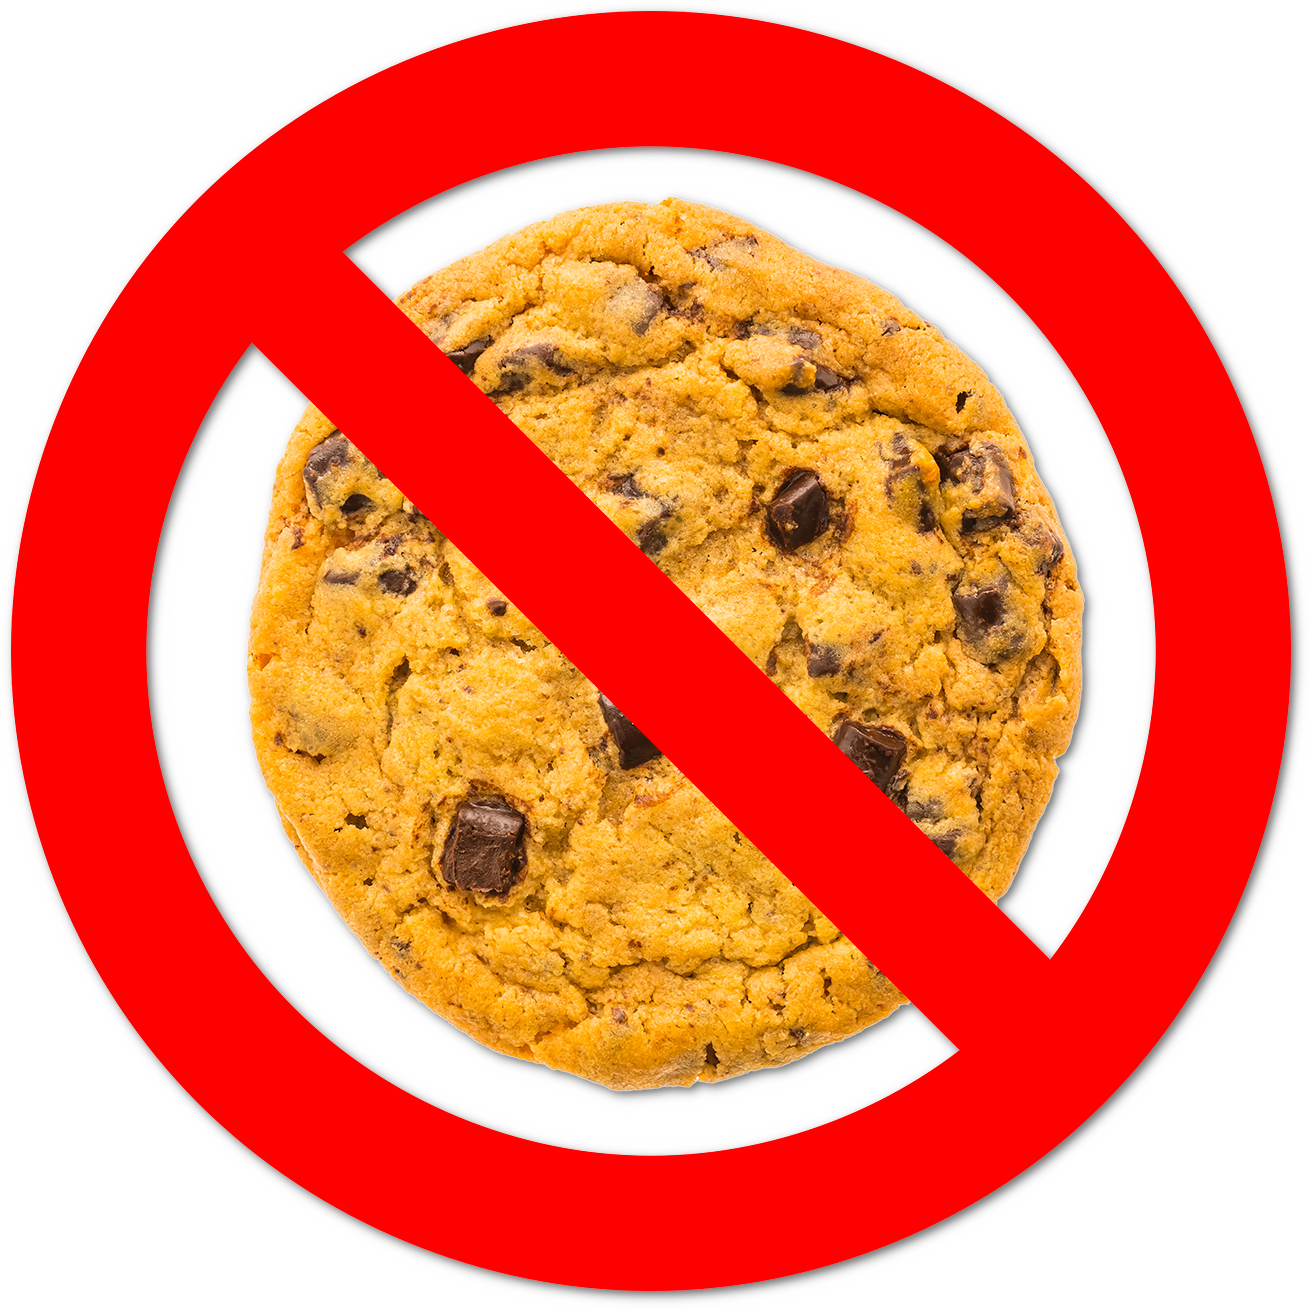 A chocolate chip cookies with a prohibition sign covering it.